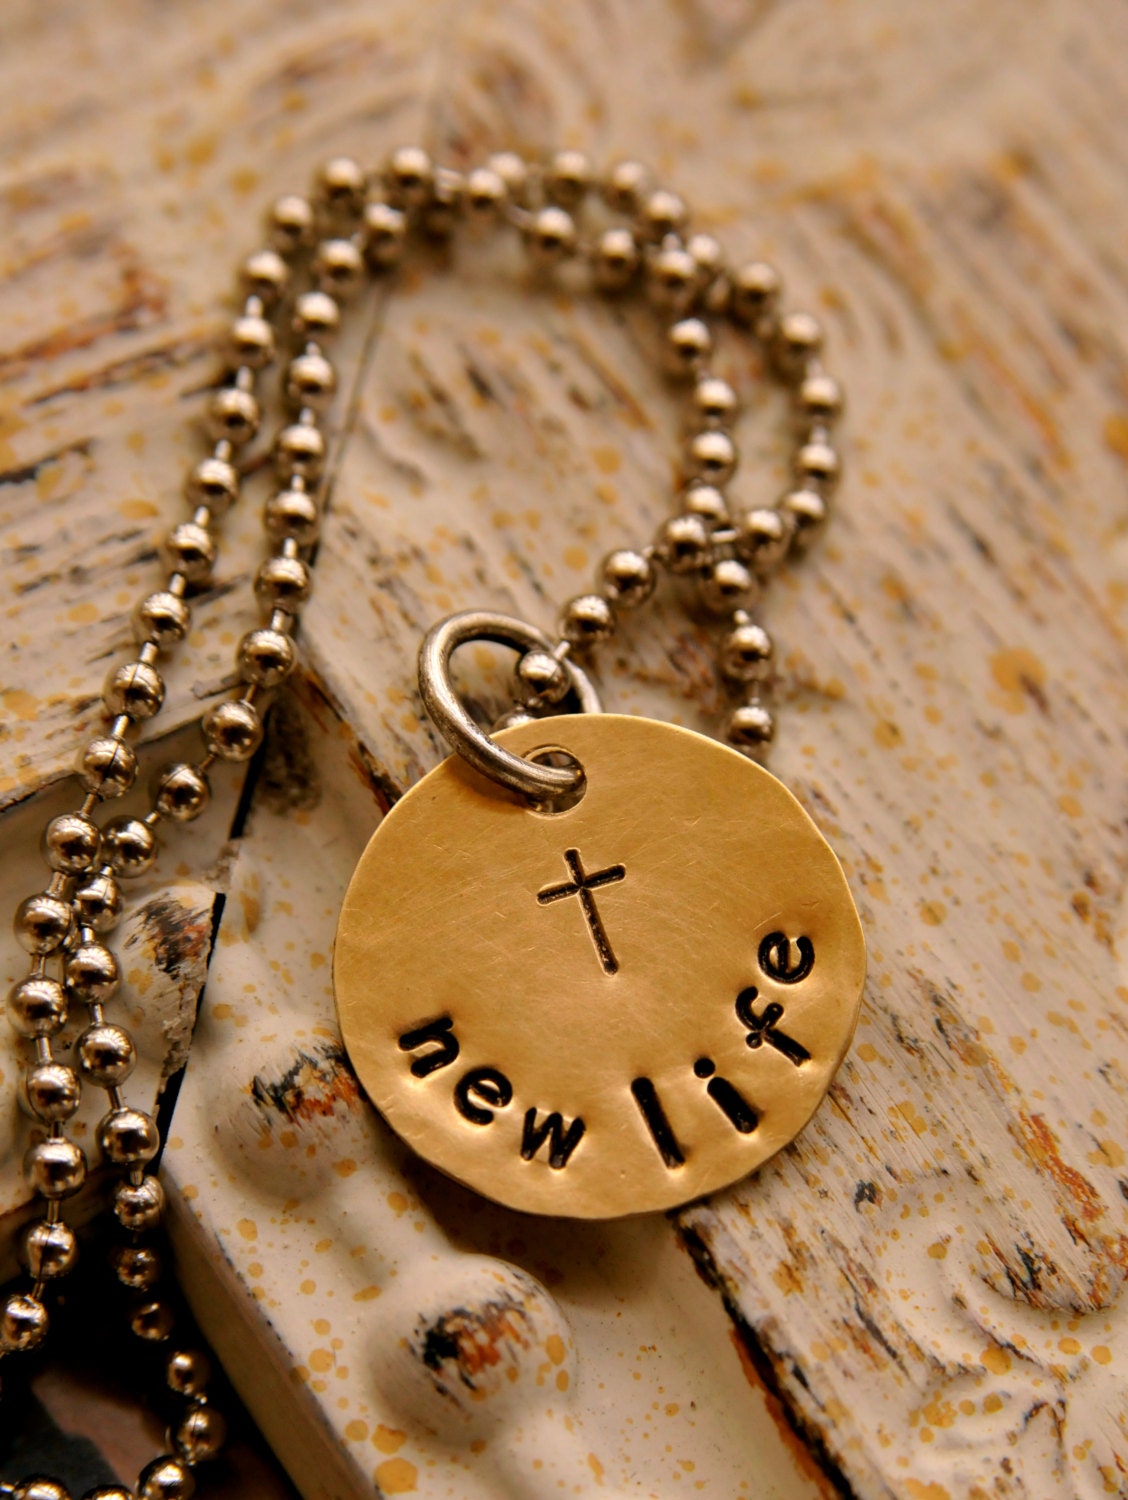 New Life medium size brass pendant. It comes with a chain, metal ball & is 3/4" in diameter. - HammeredLoveJewelry